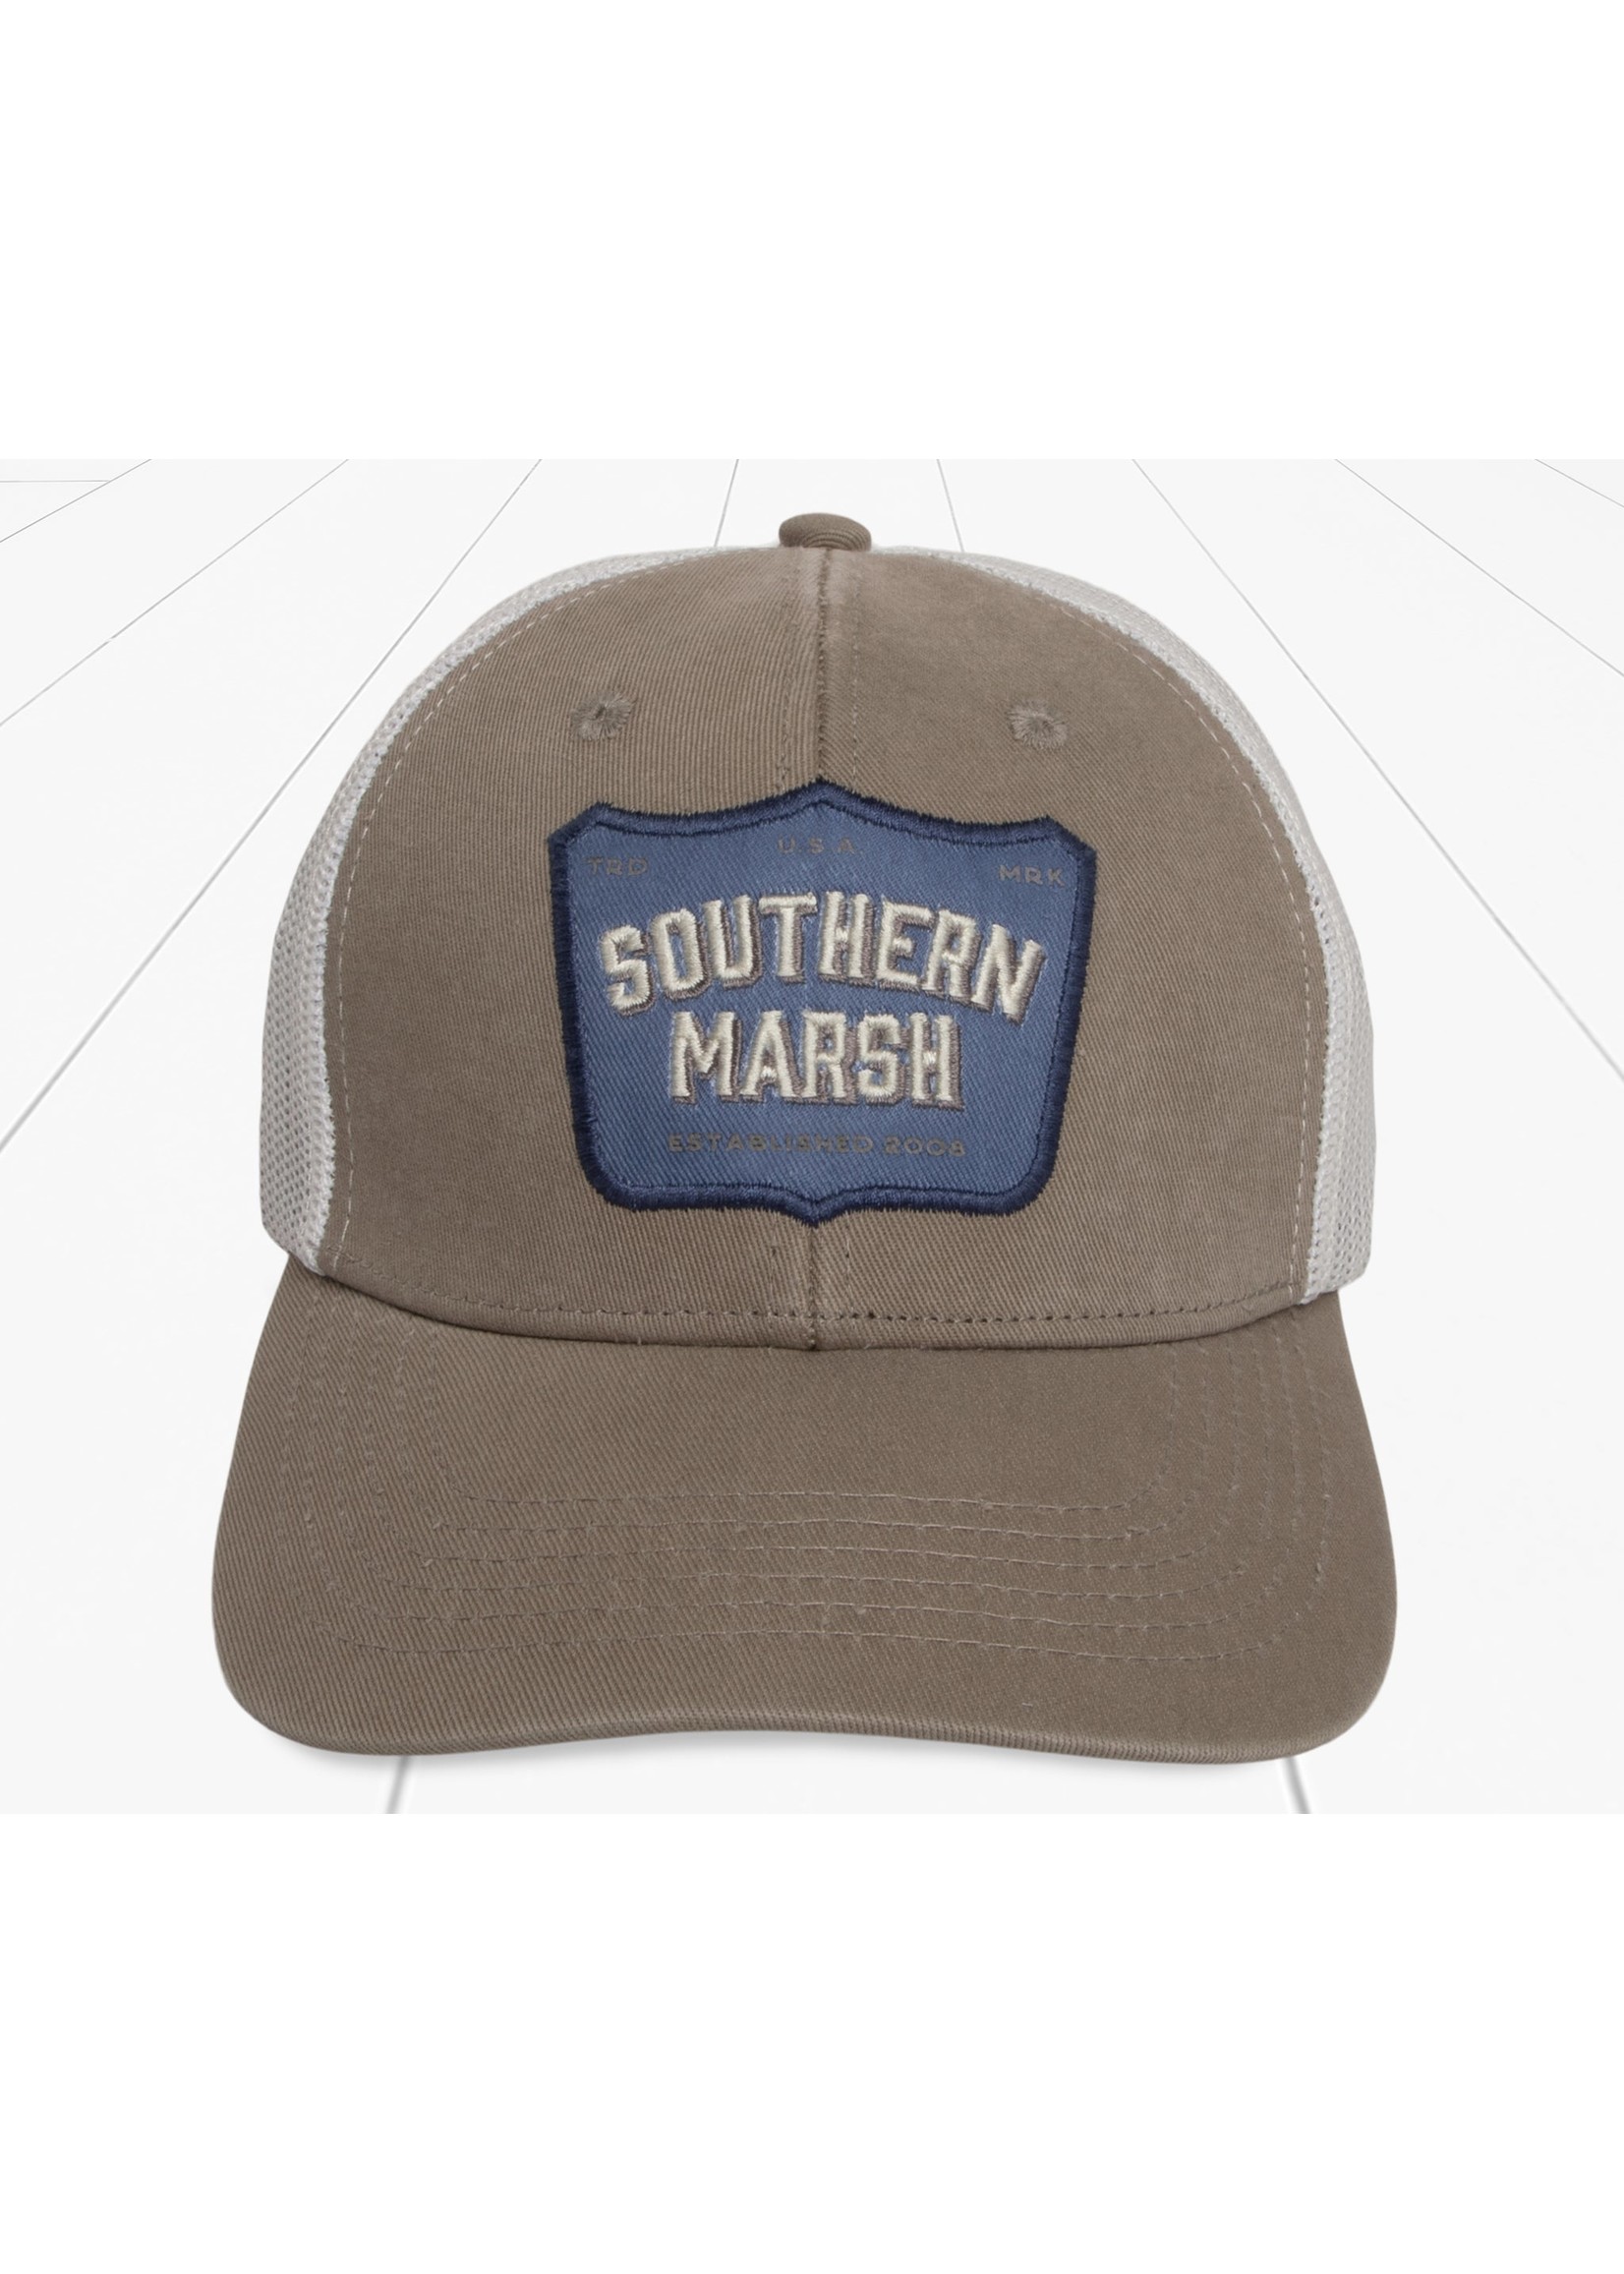 Southern Marsh Trucker Hat - Posted Lands